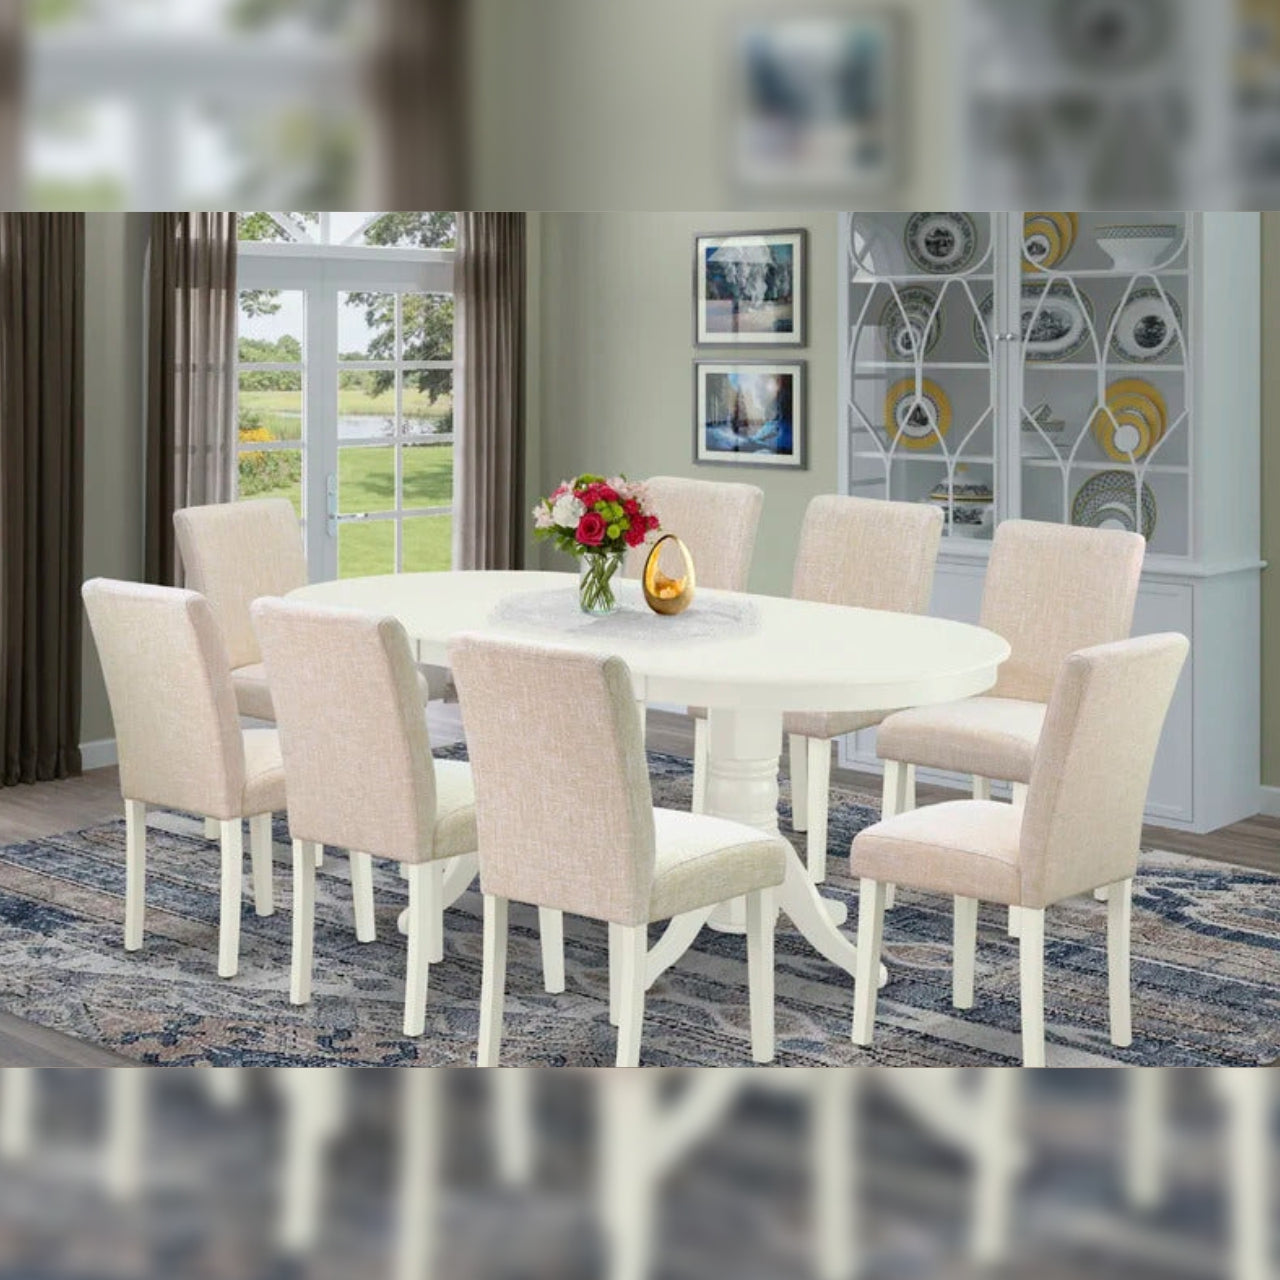 8 Seater Dining Set: Luxurious Solid Wood Round Dining Table – Gkw Retail